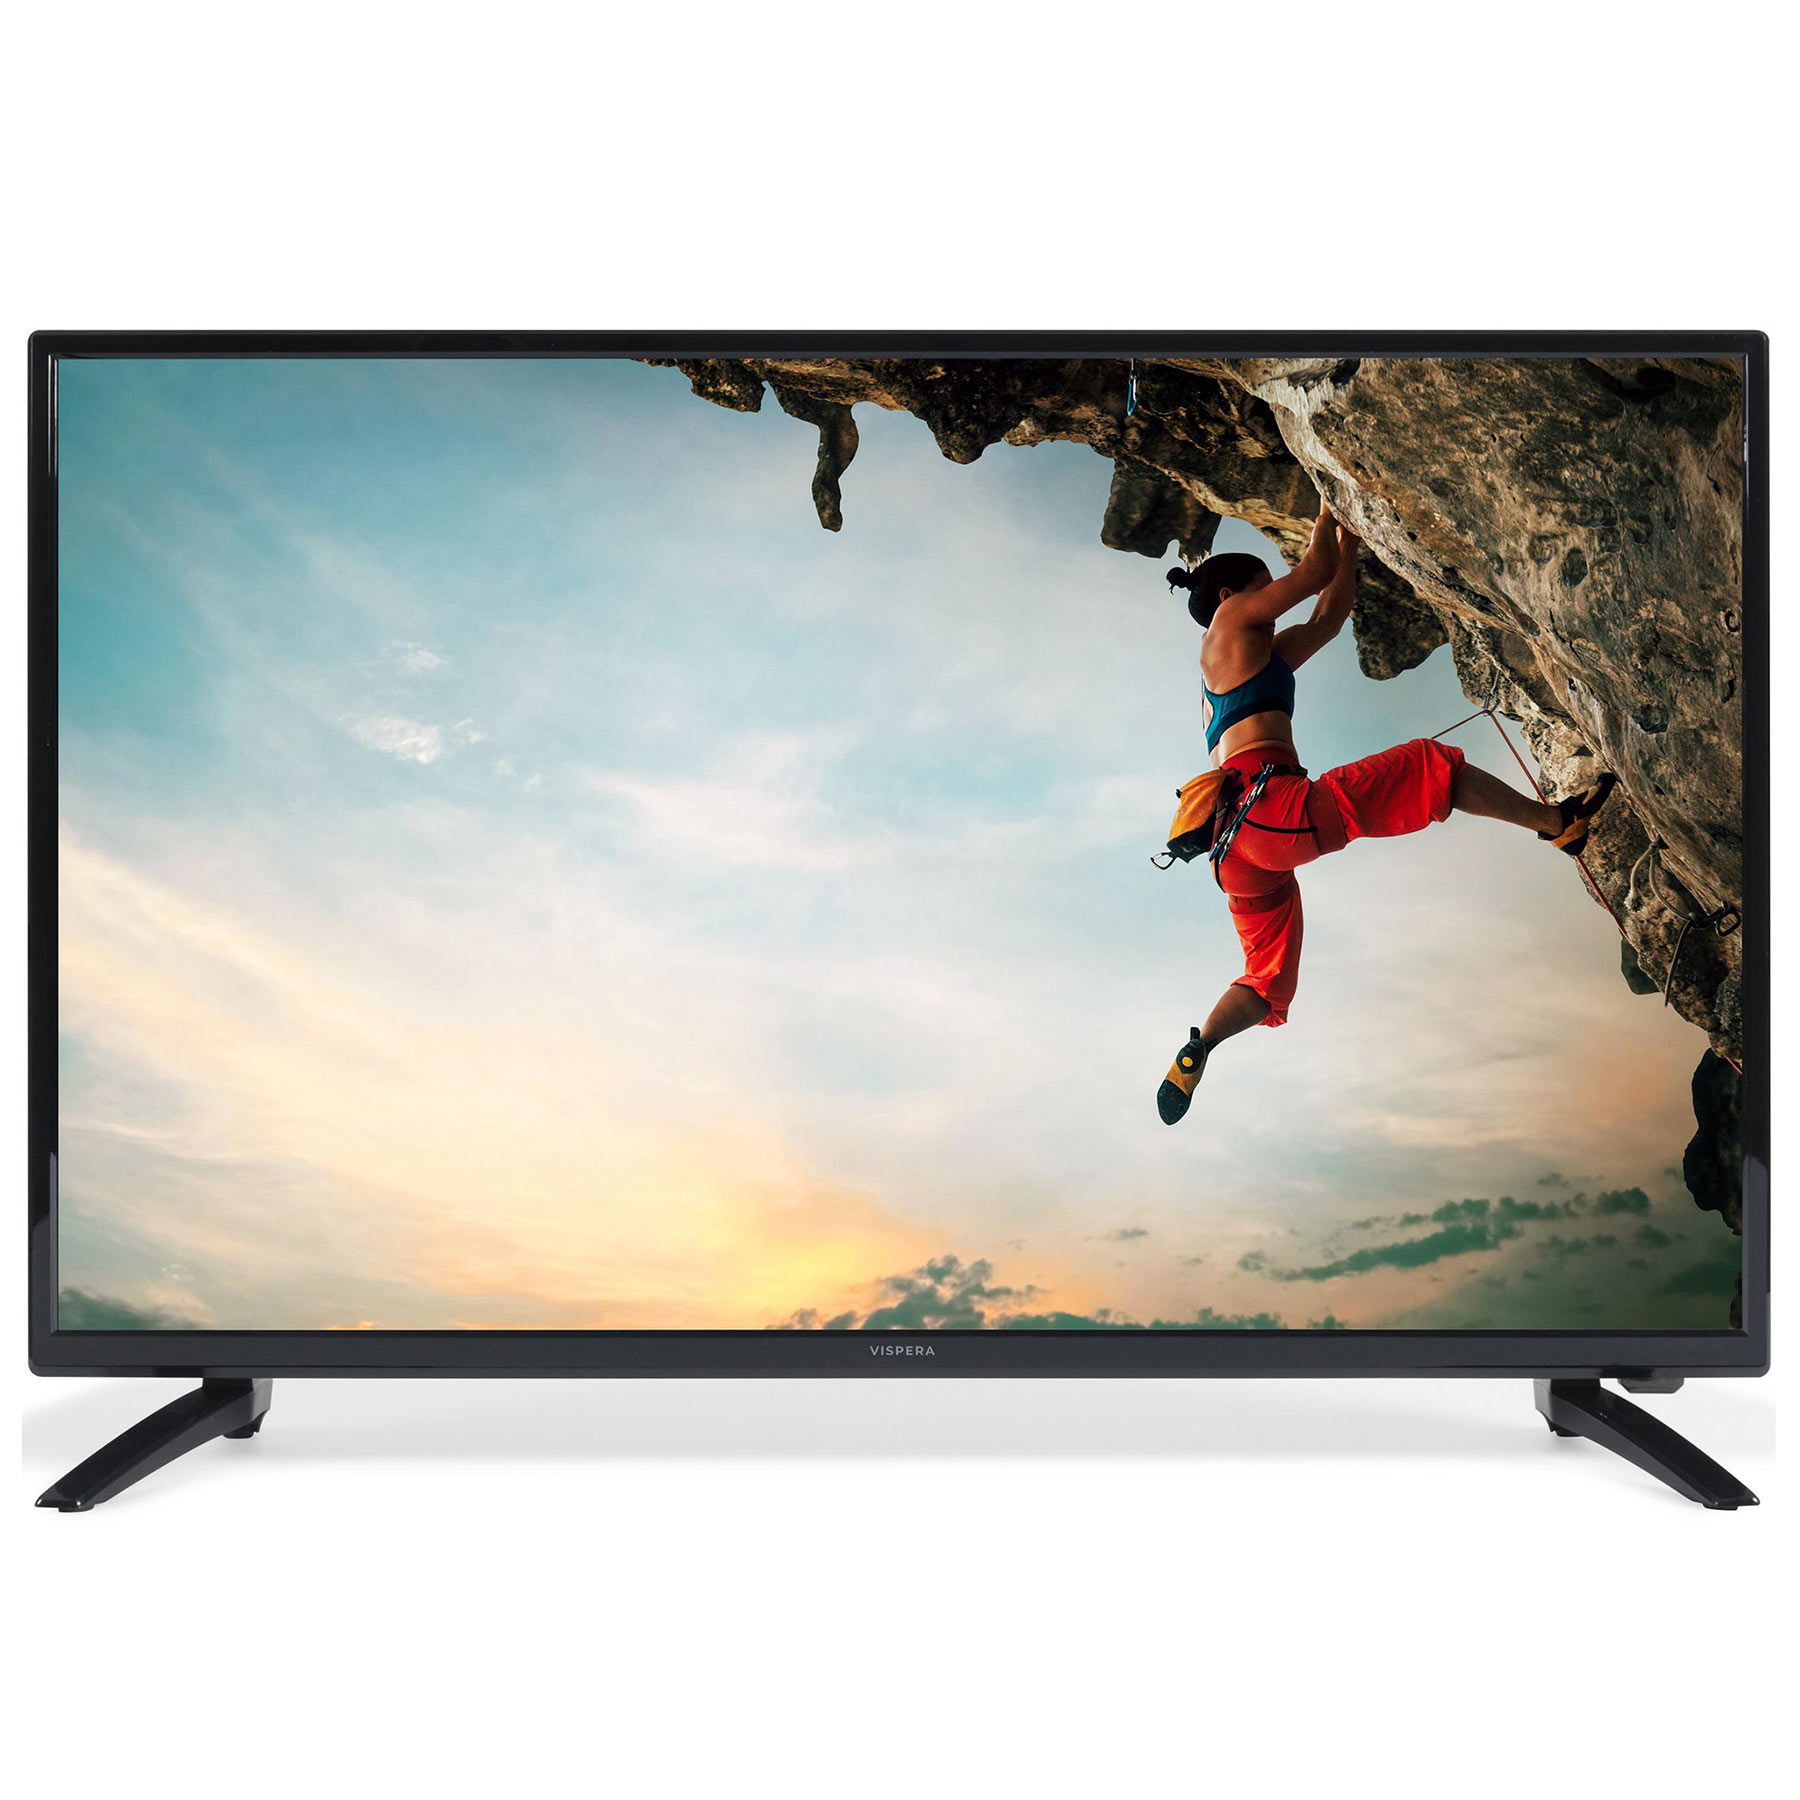 Image of Vispera 32ECHO1 32 HD Ready LED TV with Freeview HD in Black